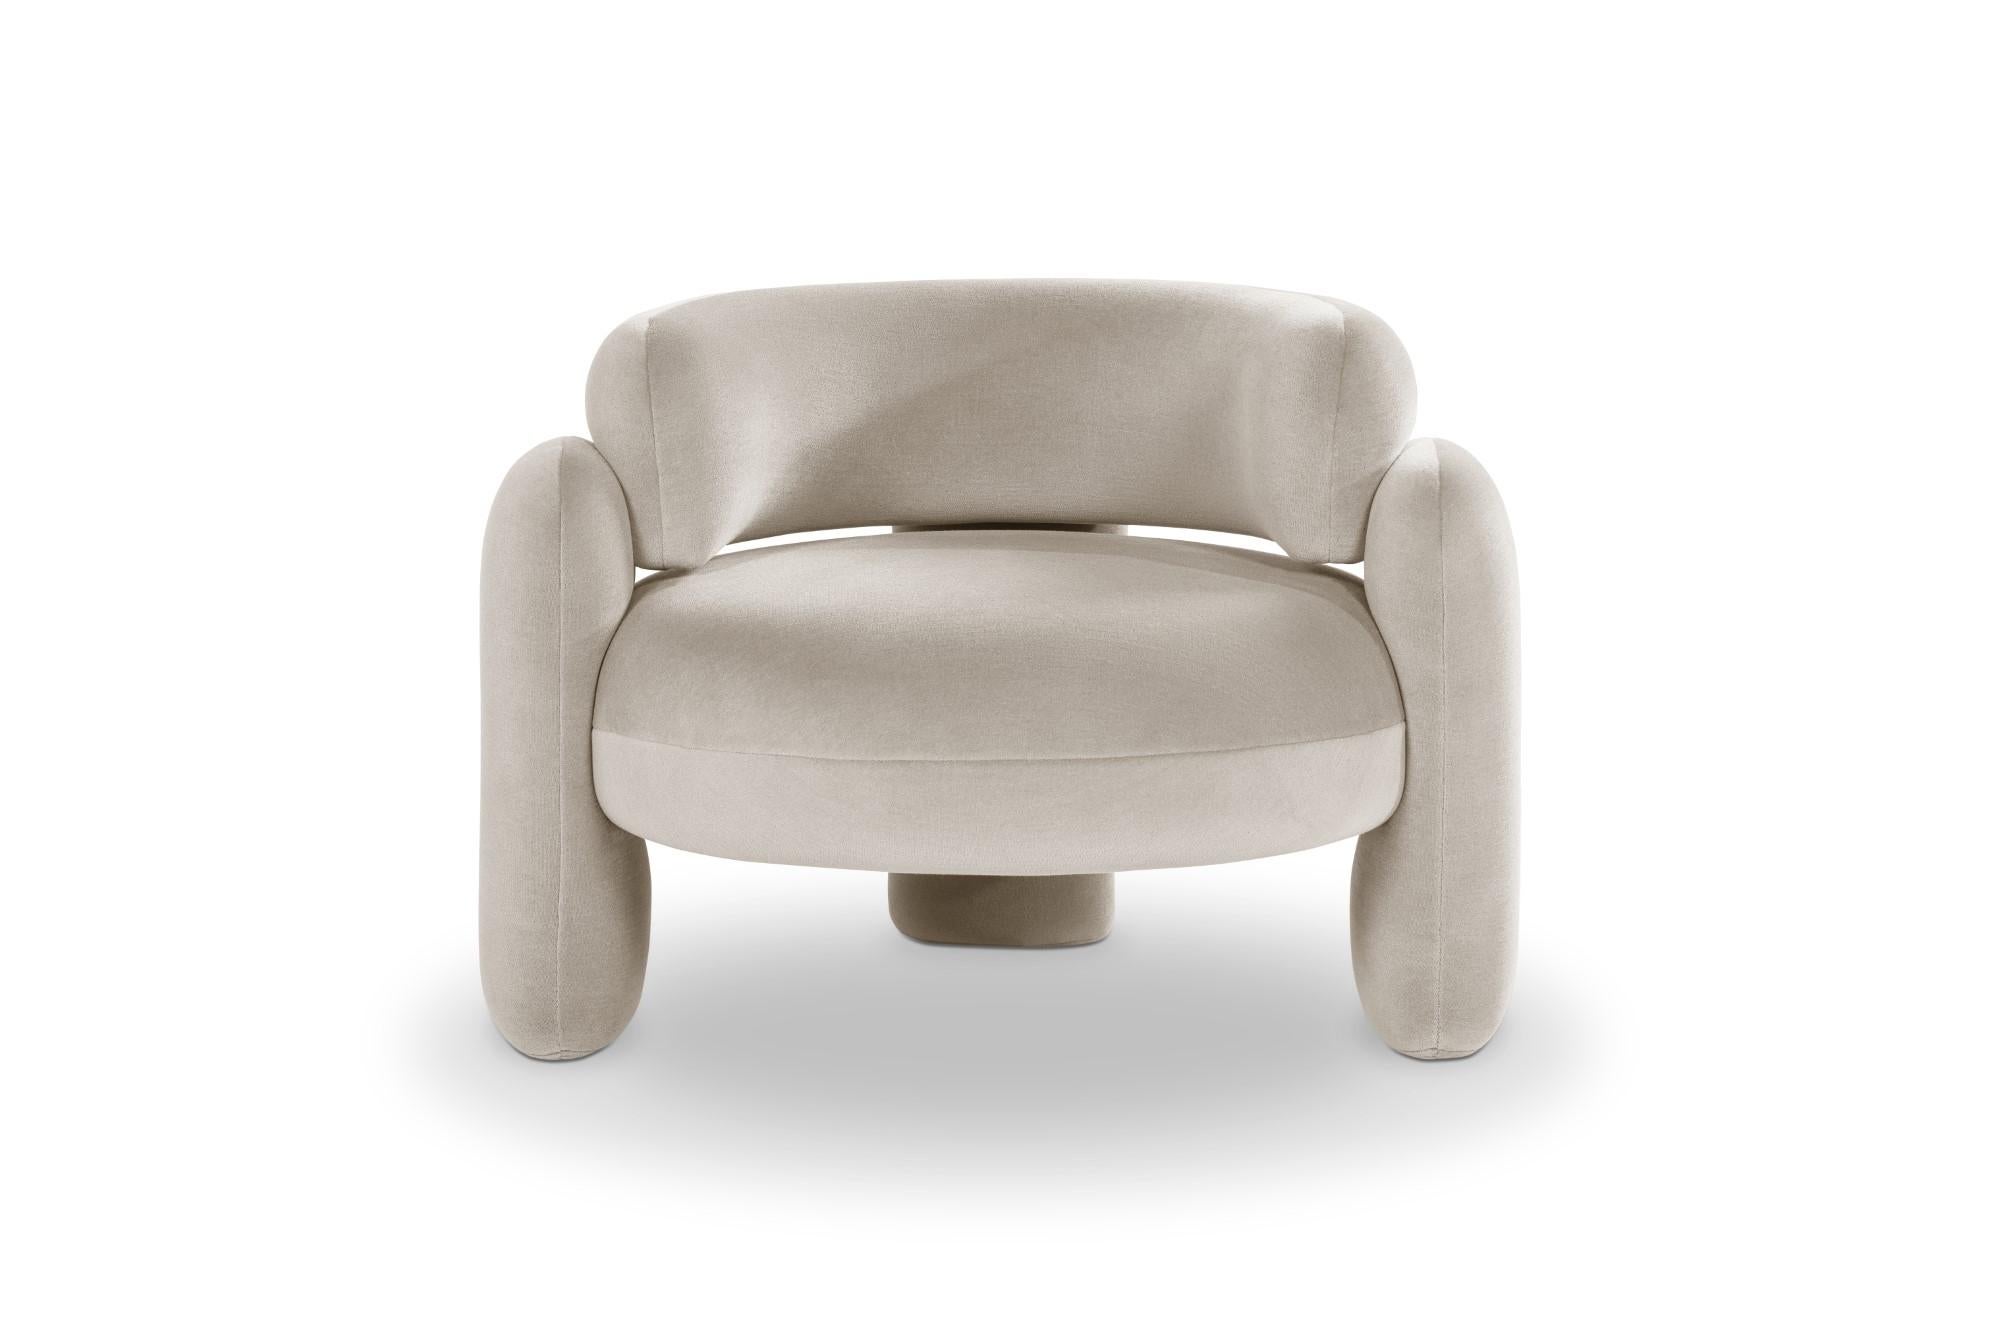 Embrace gentle 223 armchair by Royal Stranger 
Dimensions: W 96 x D 85 x H 68 cm.
Different upholstery colors and finishes are available.
Materials: Upholstery.

Featuring an enfolding composition of geometrical shapes, the Embrace Armchair